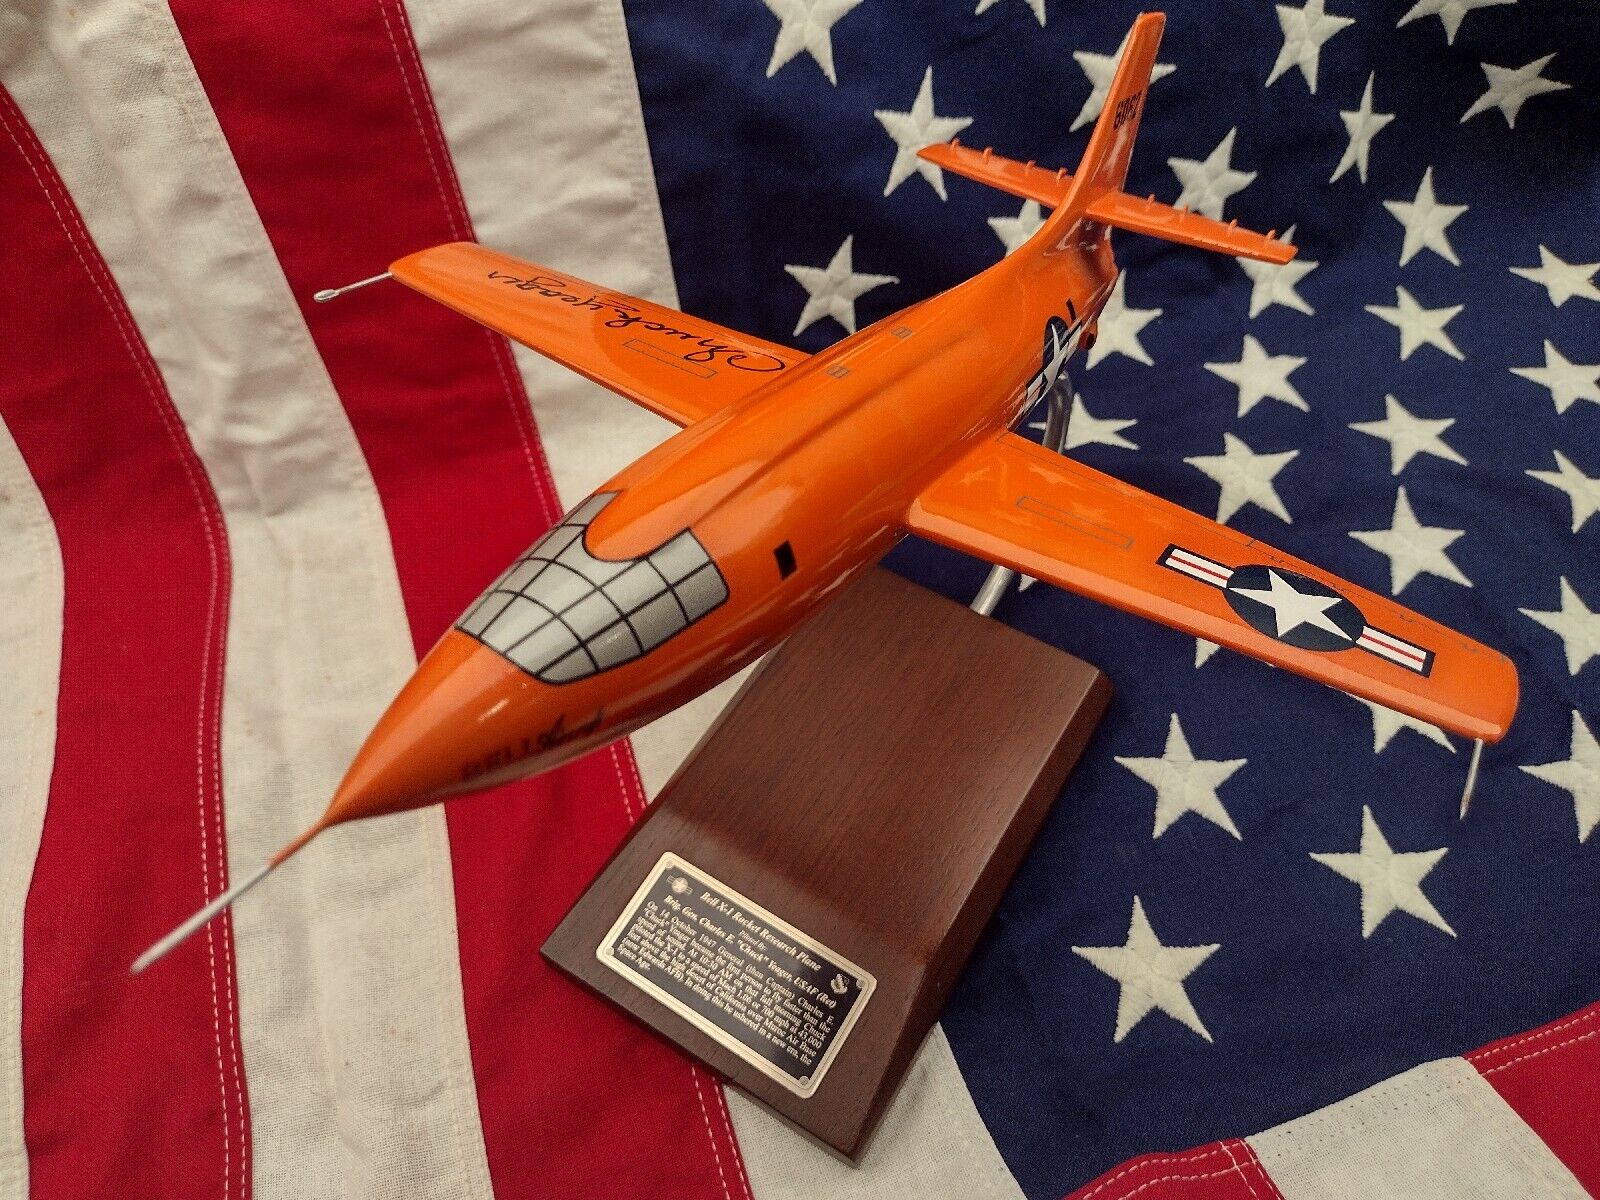 Bell X1 Model -  Autographed by Chuck Yeager with bonus USA flag & photos.